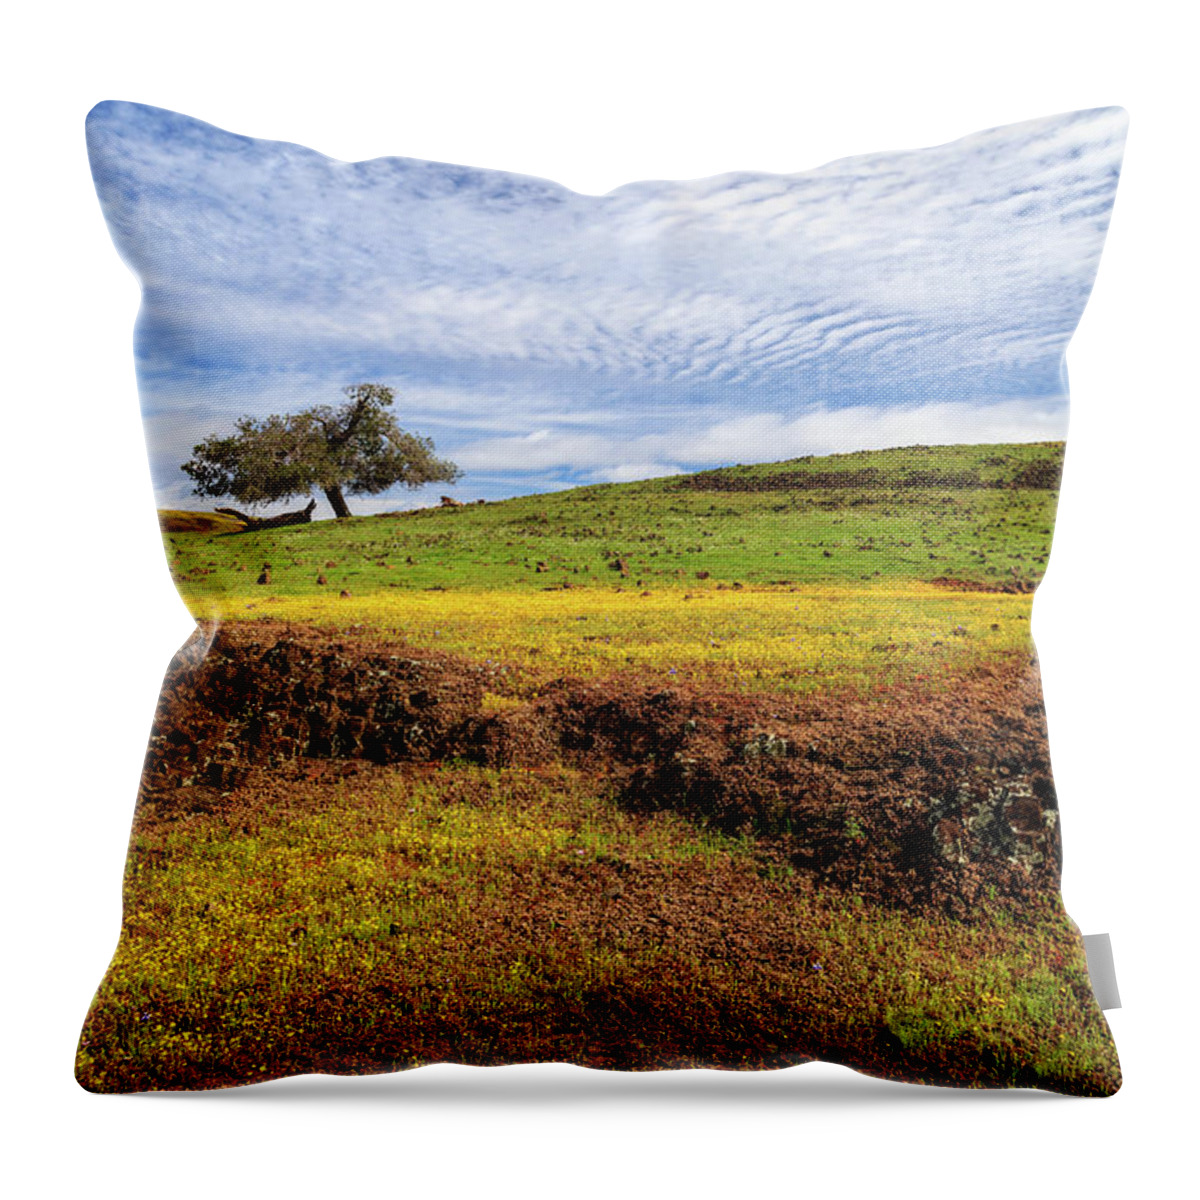 Lava Rock Throw Pillow featuring the photograph Spring On North Table Mountain by James Eddy